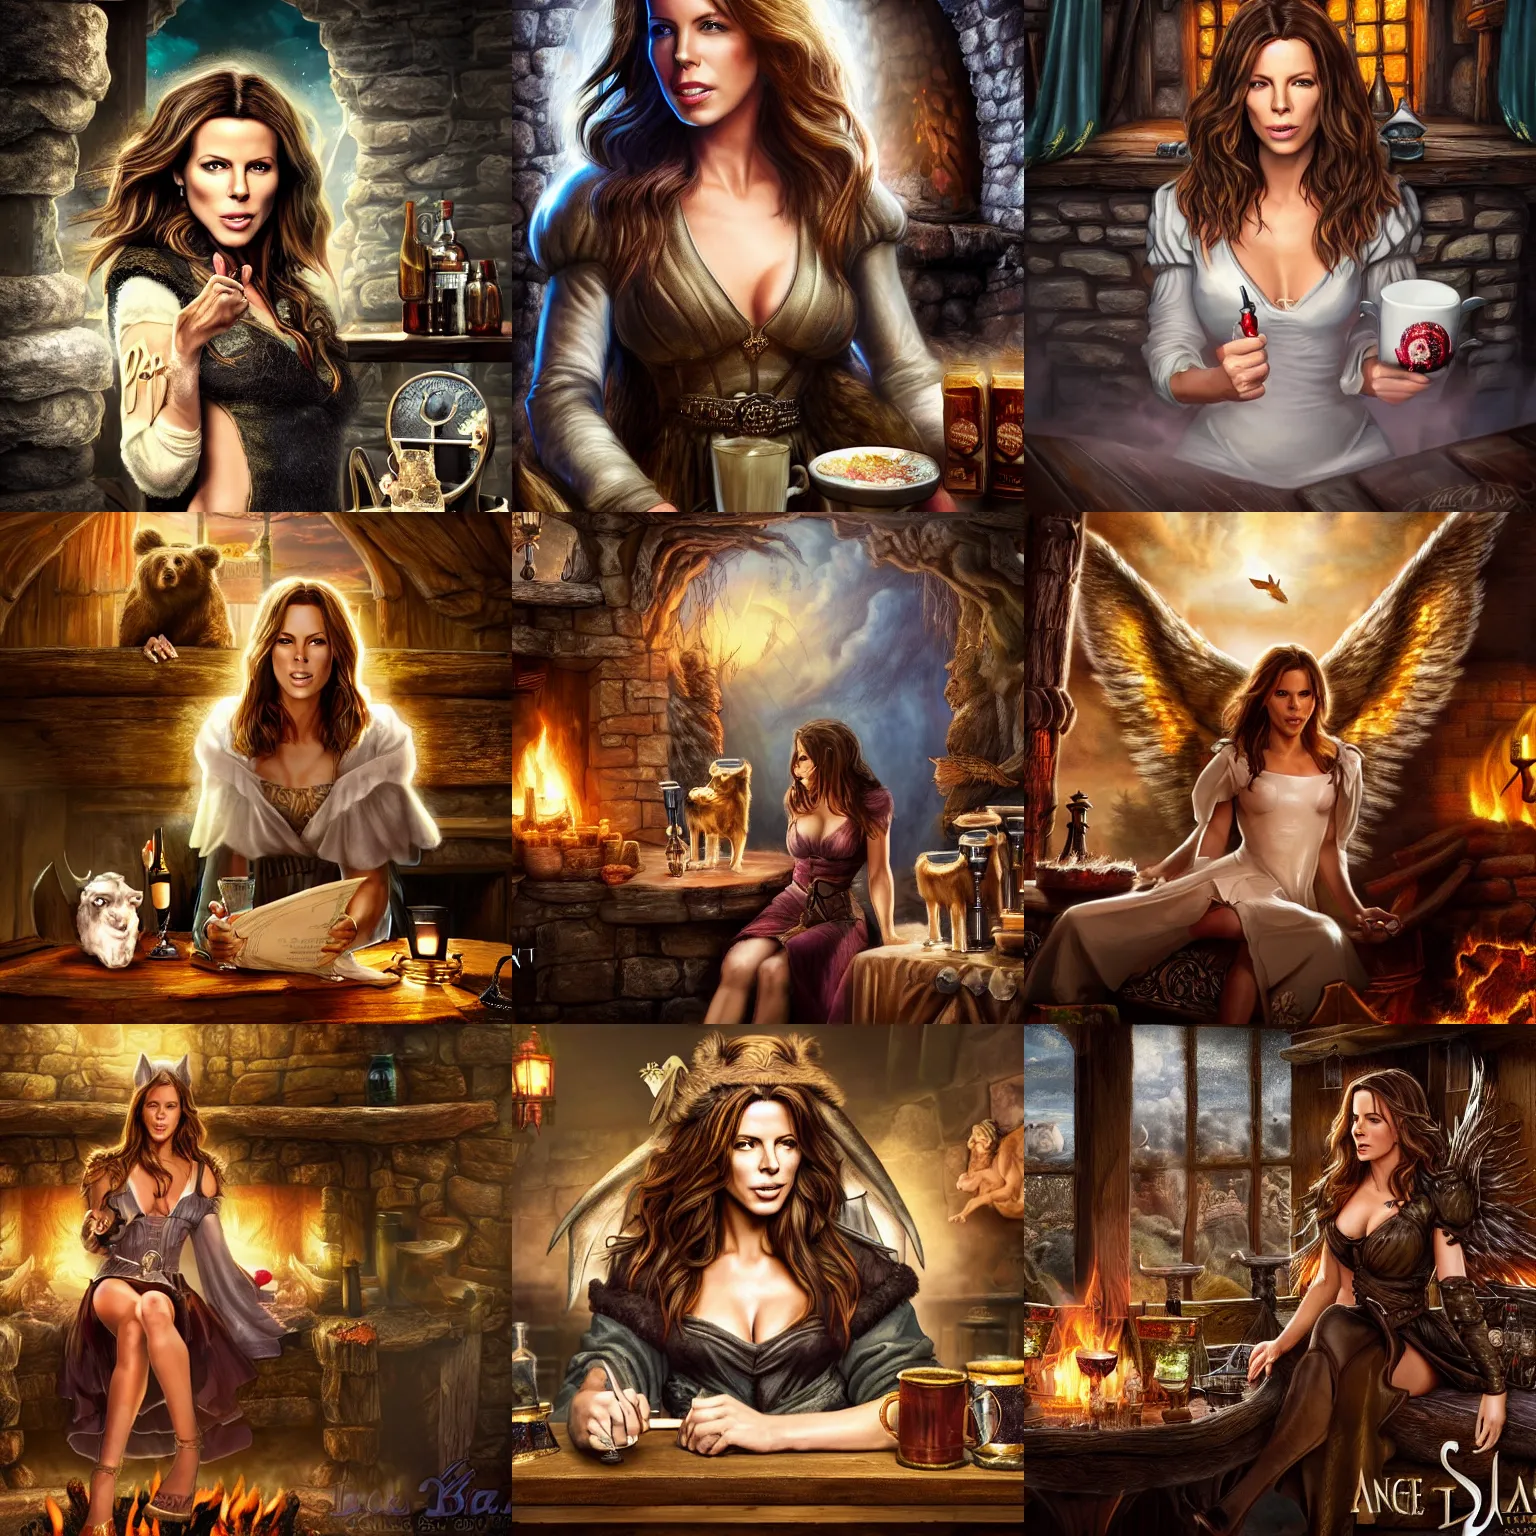 Prompt: kate beckinsale as angel weared in clouds, sit in fantasy tavern near fireplace, behind bar deck with bear mugs, medieval dnd, colorfull digital fantasy art, 4k